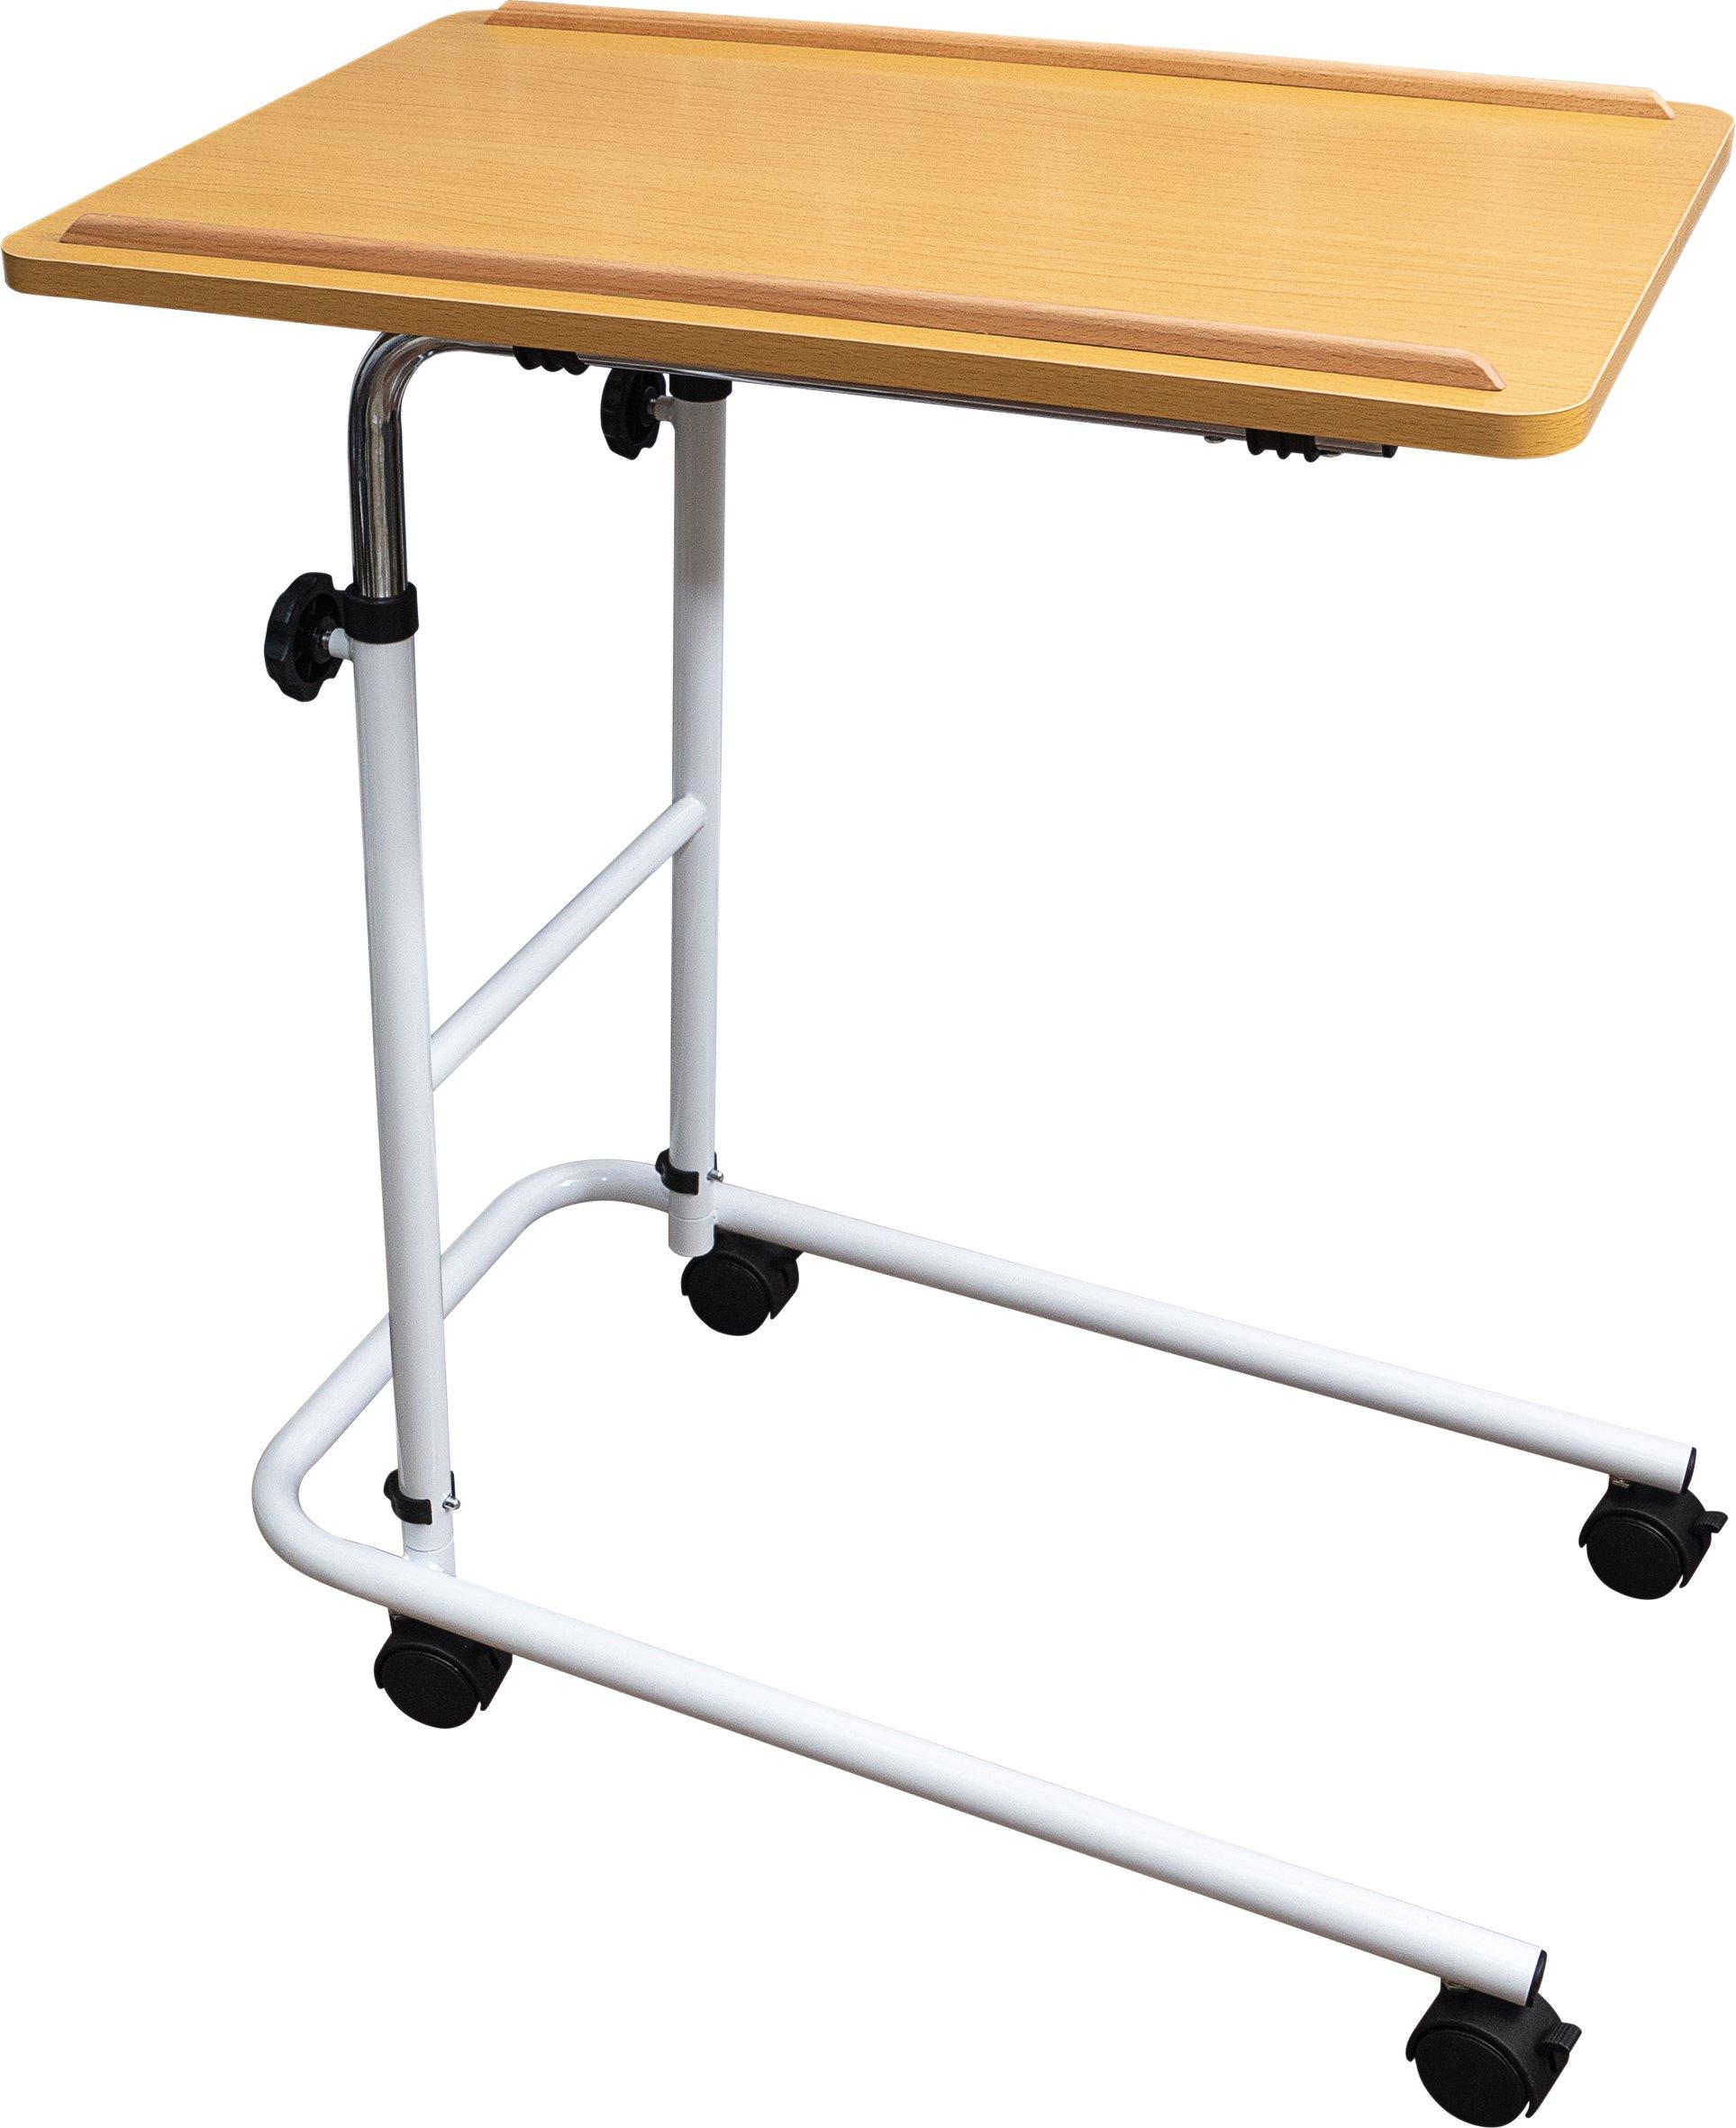 Economy Overbed Table With Castors